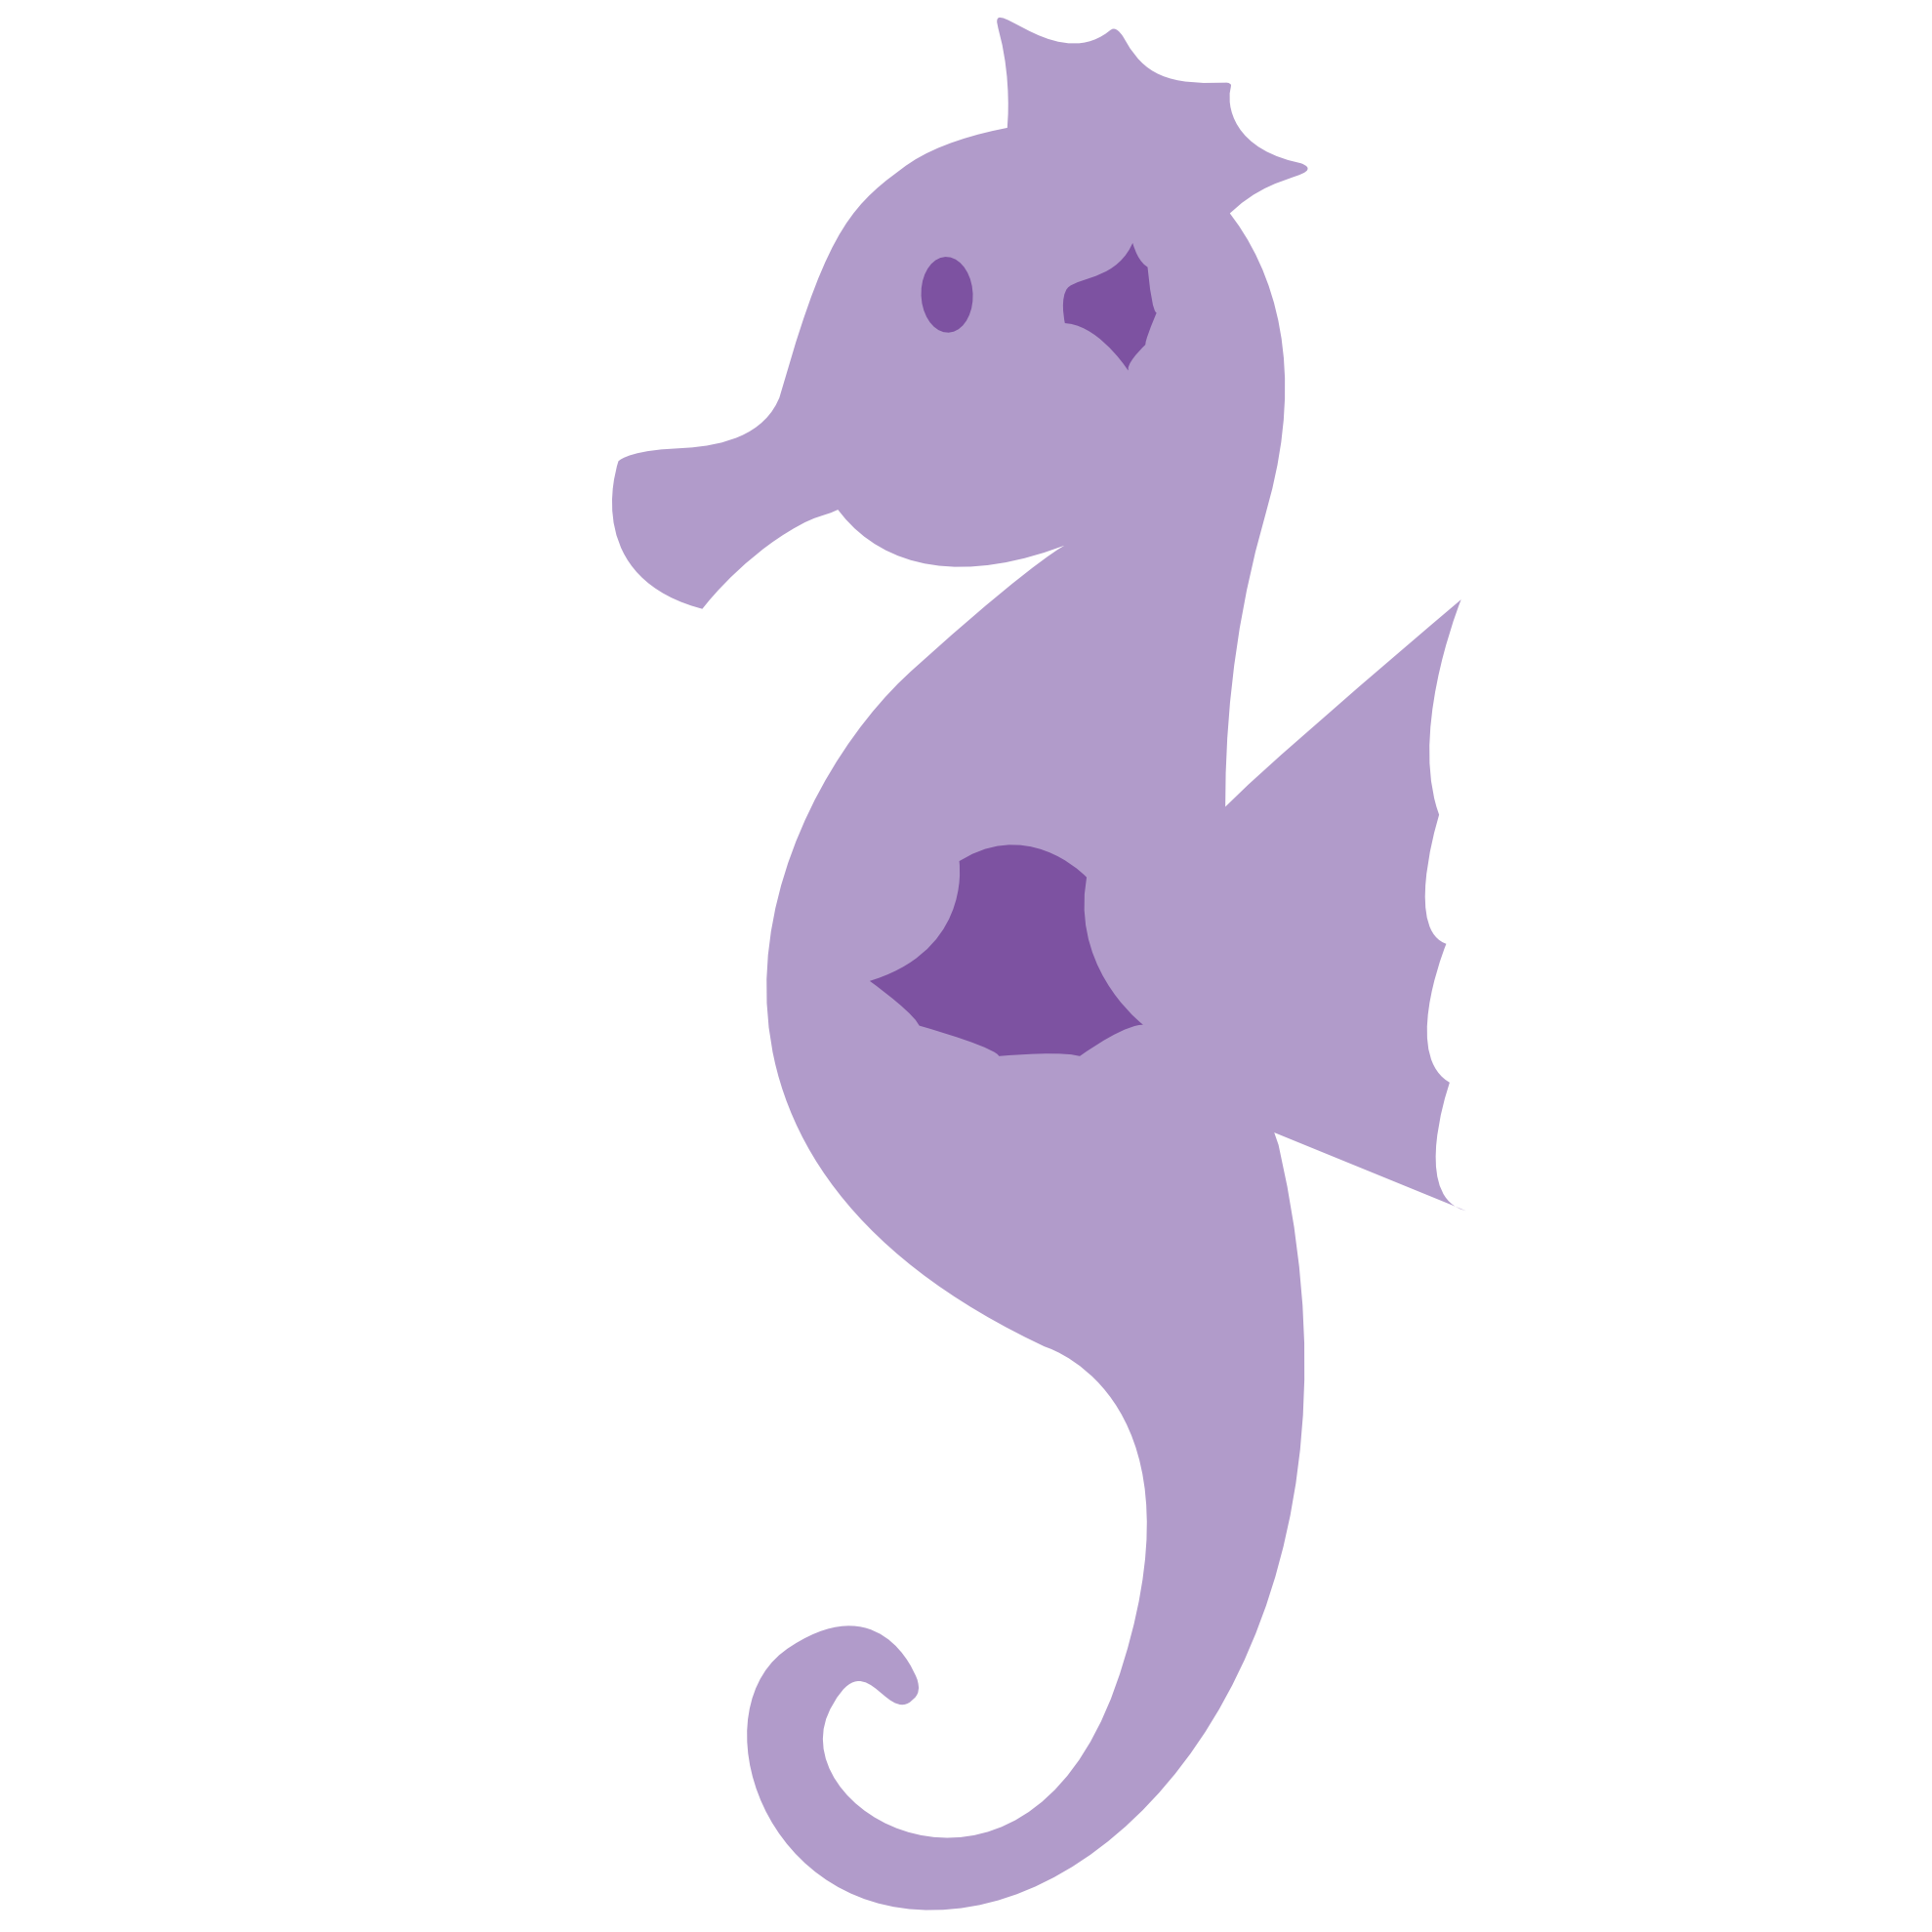 Seahorse Silhouette | Clipart library - Free Clipart Images